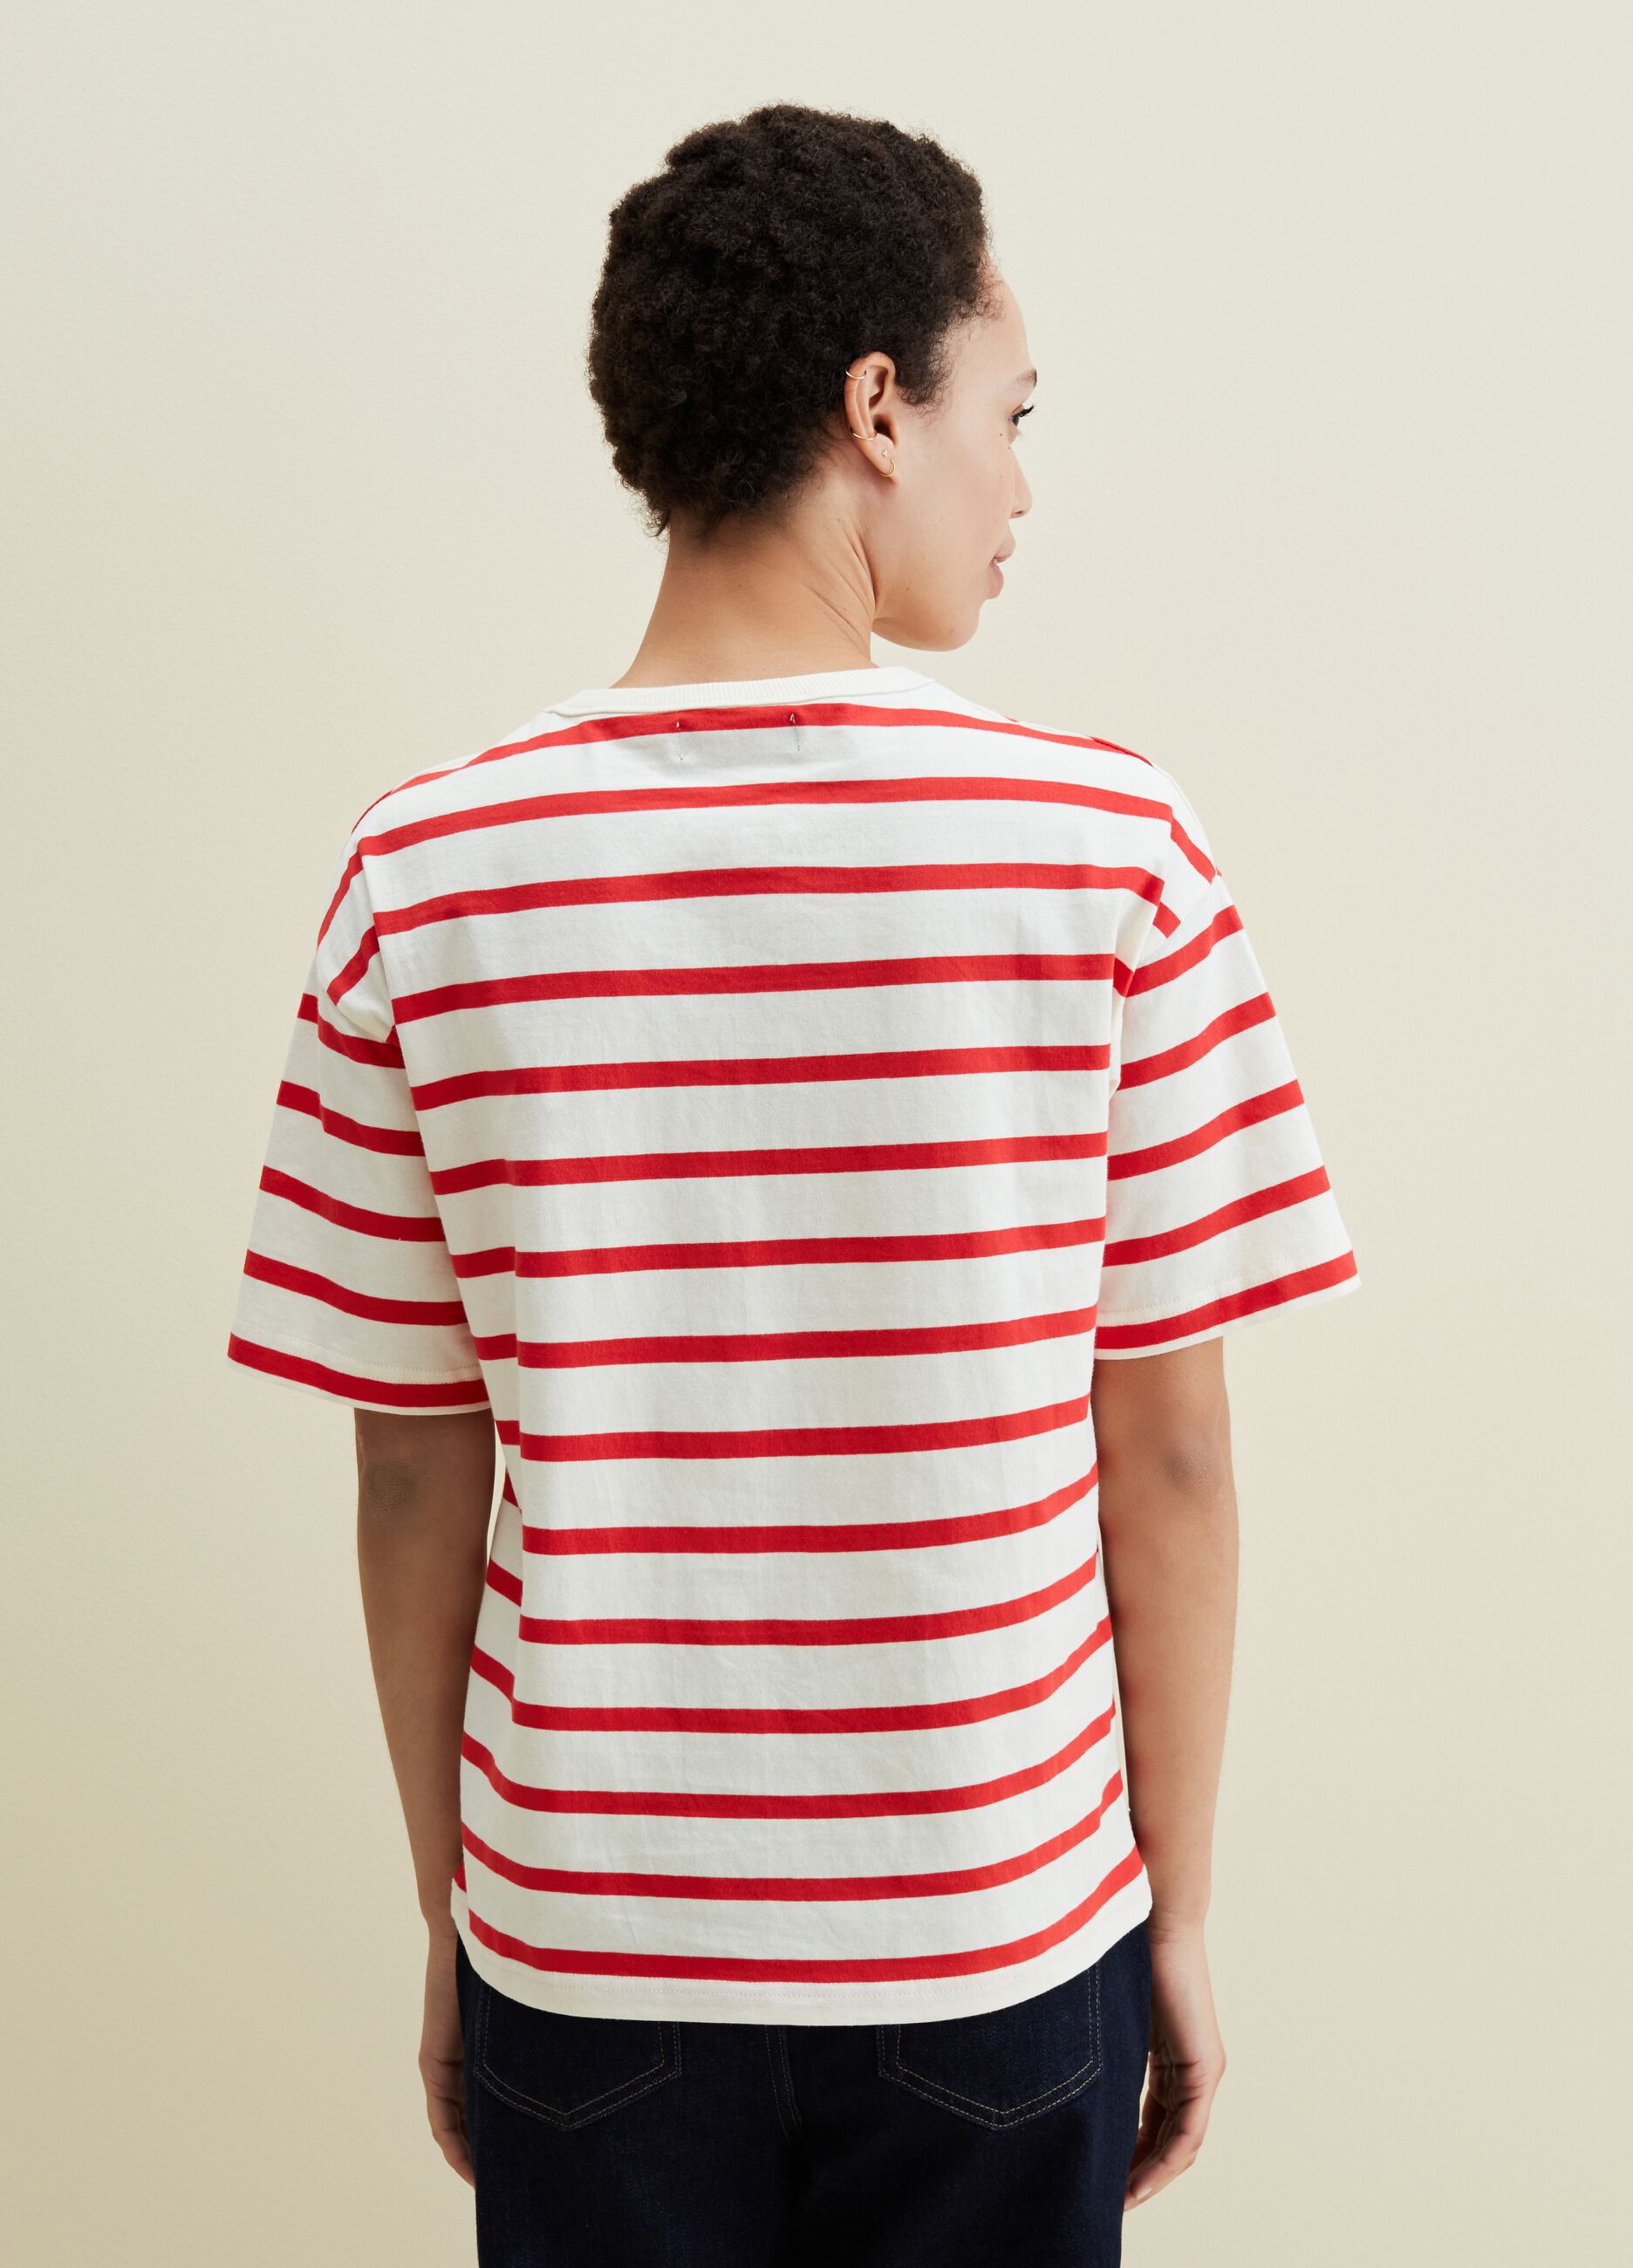 Oversized T-shirt with striped pattern